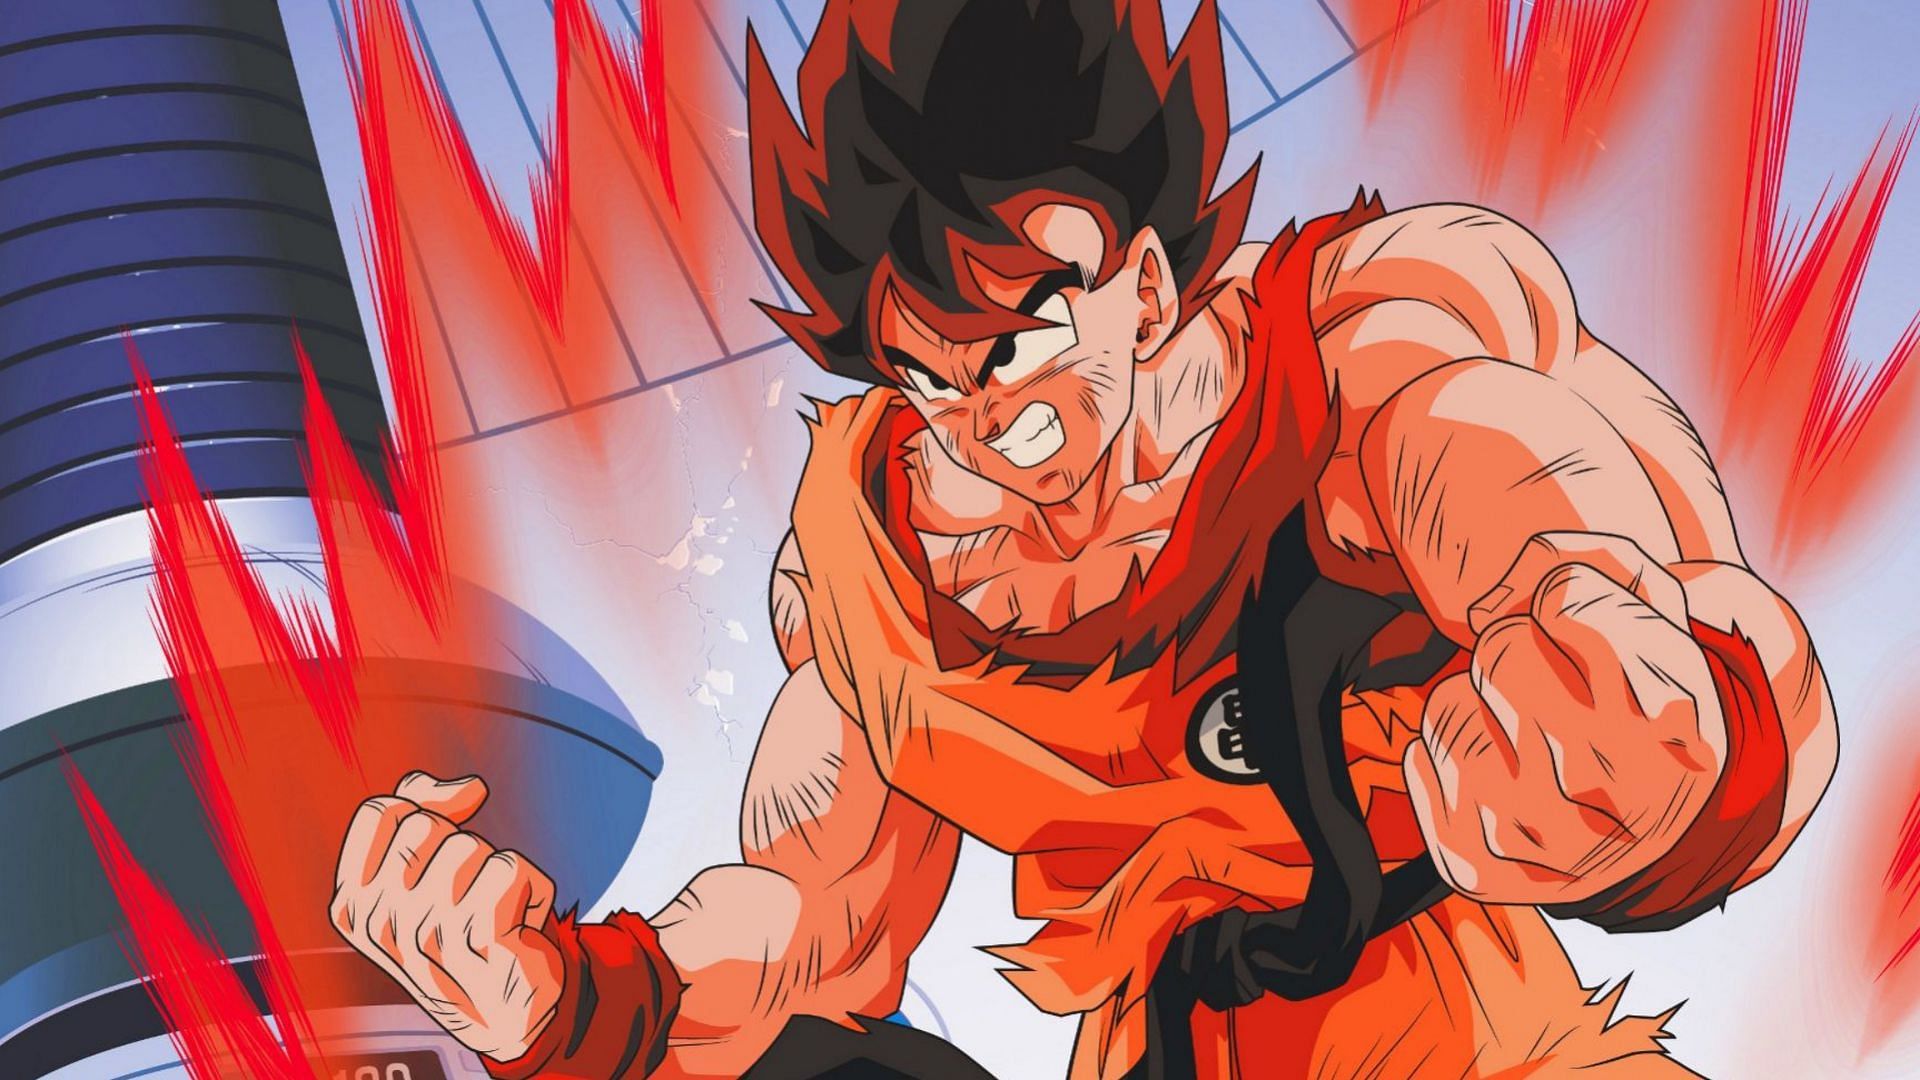 Goku as shown in the series (Image via Toei Animation)